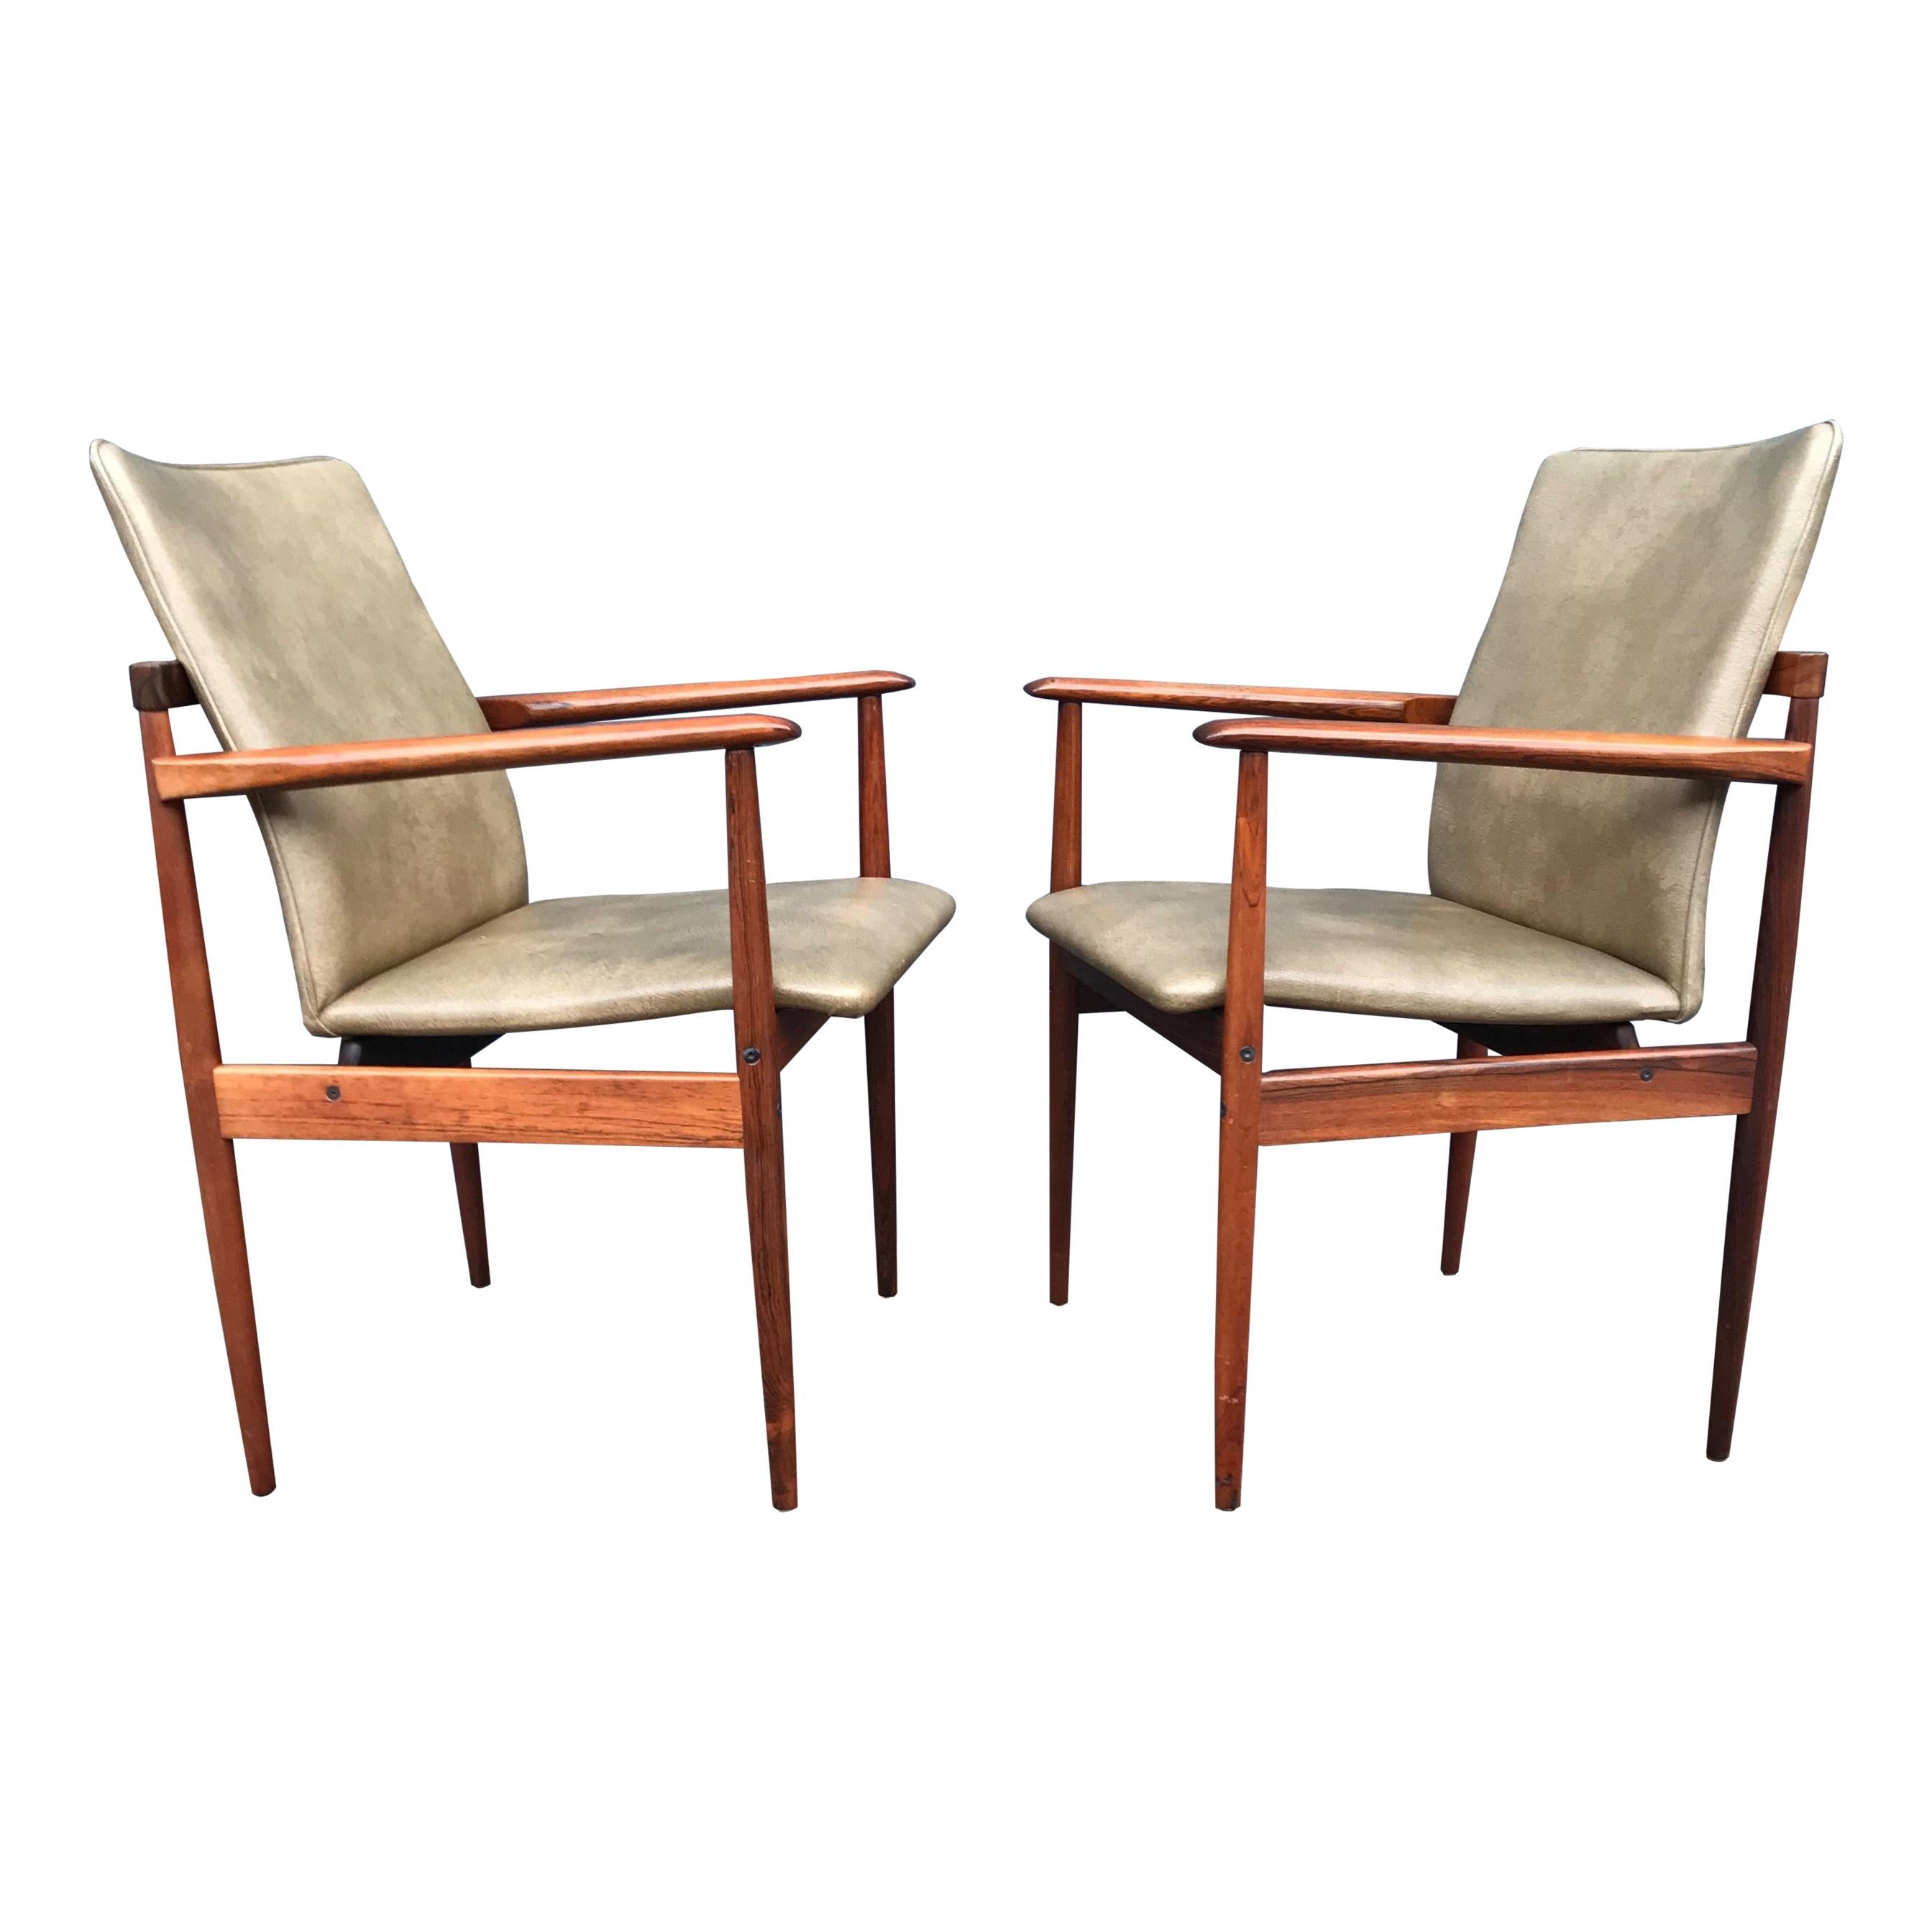 Stunning & Stylish Pair of Handcrafted Midcentury Modern Solid Wooden Armchairs